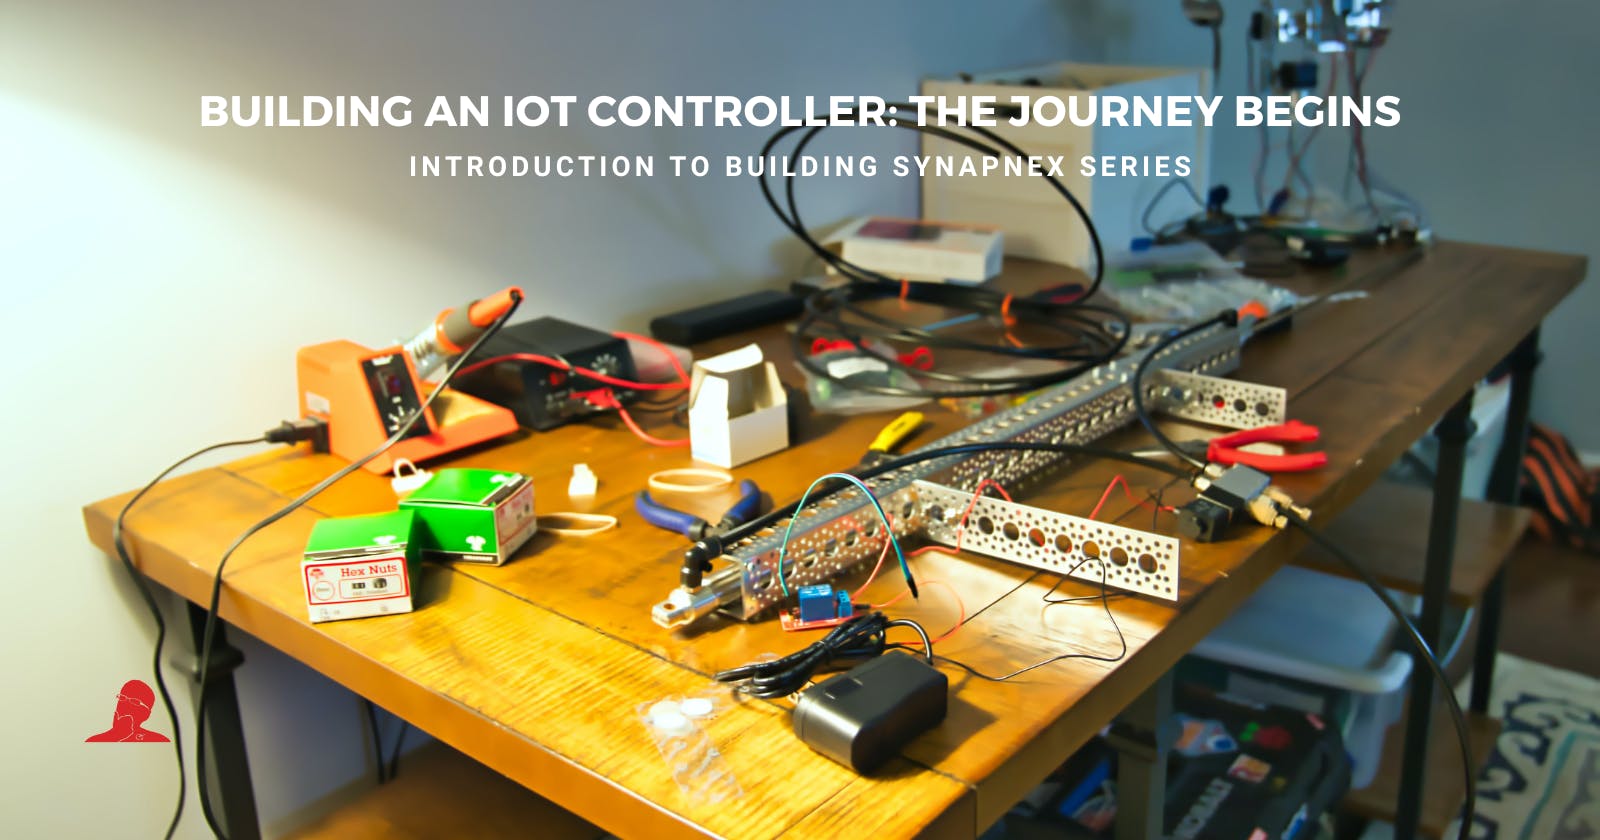 Building an IoT Controller: The Journey Begins